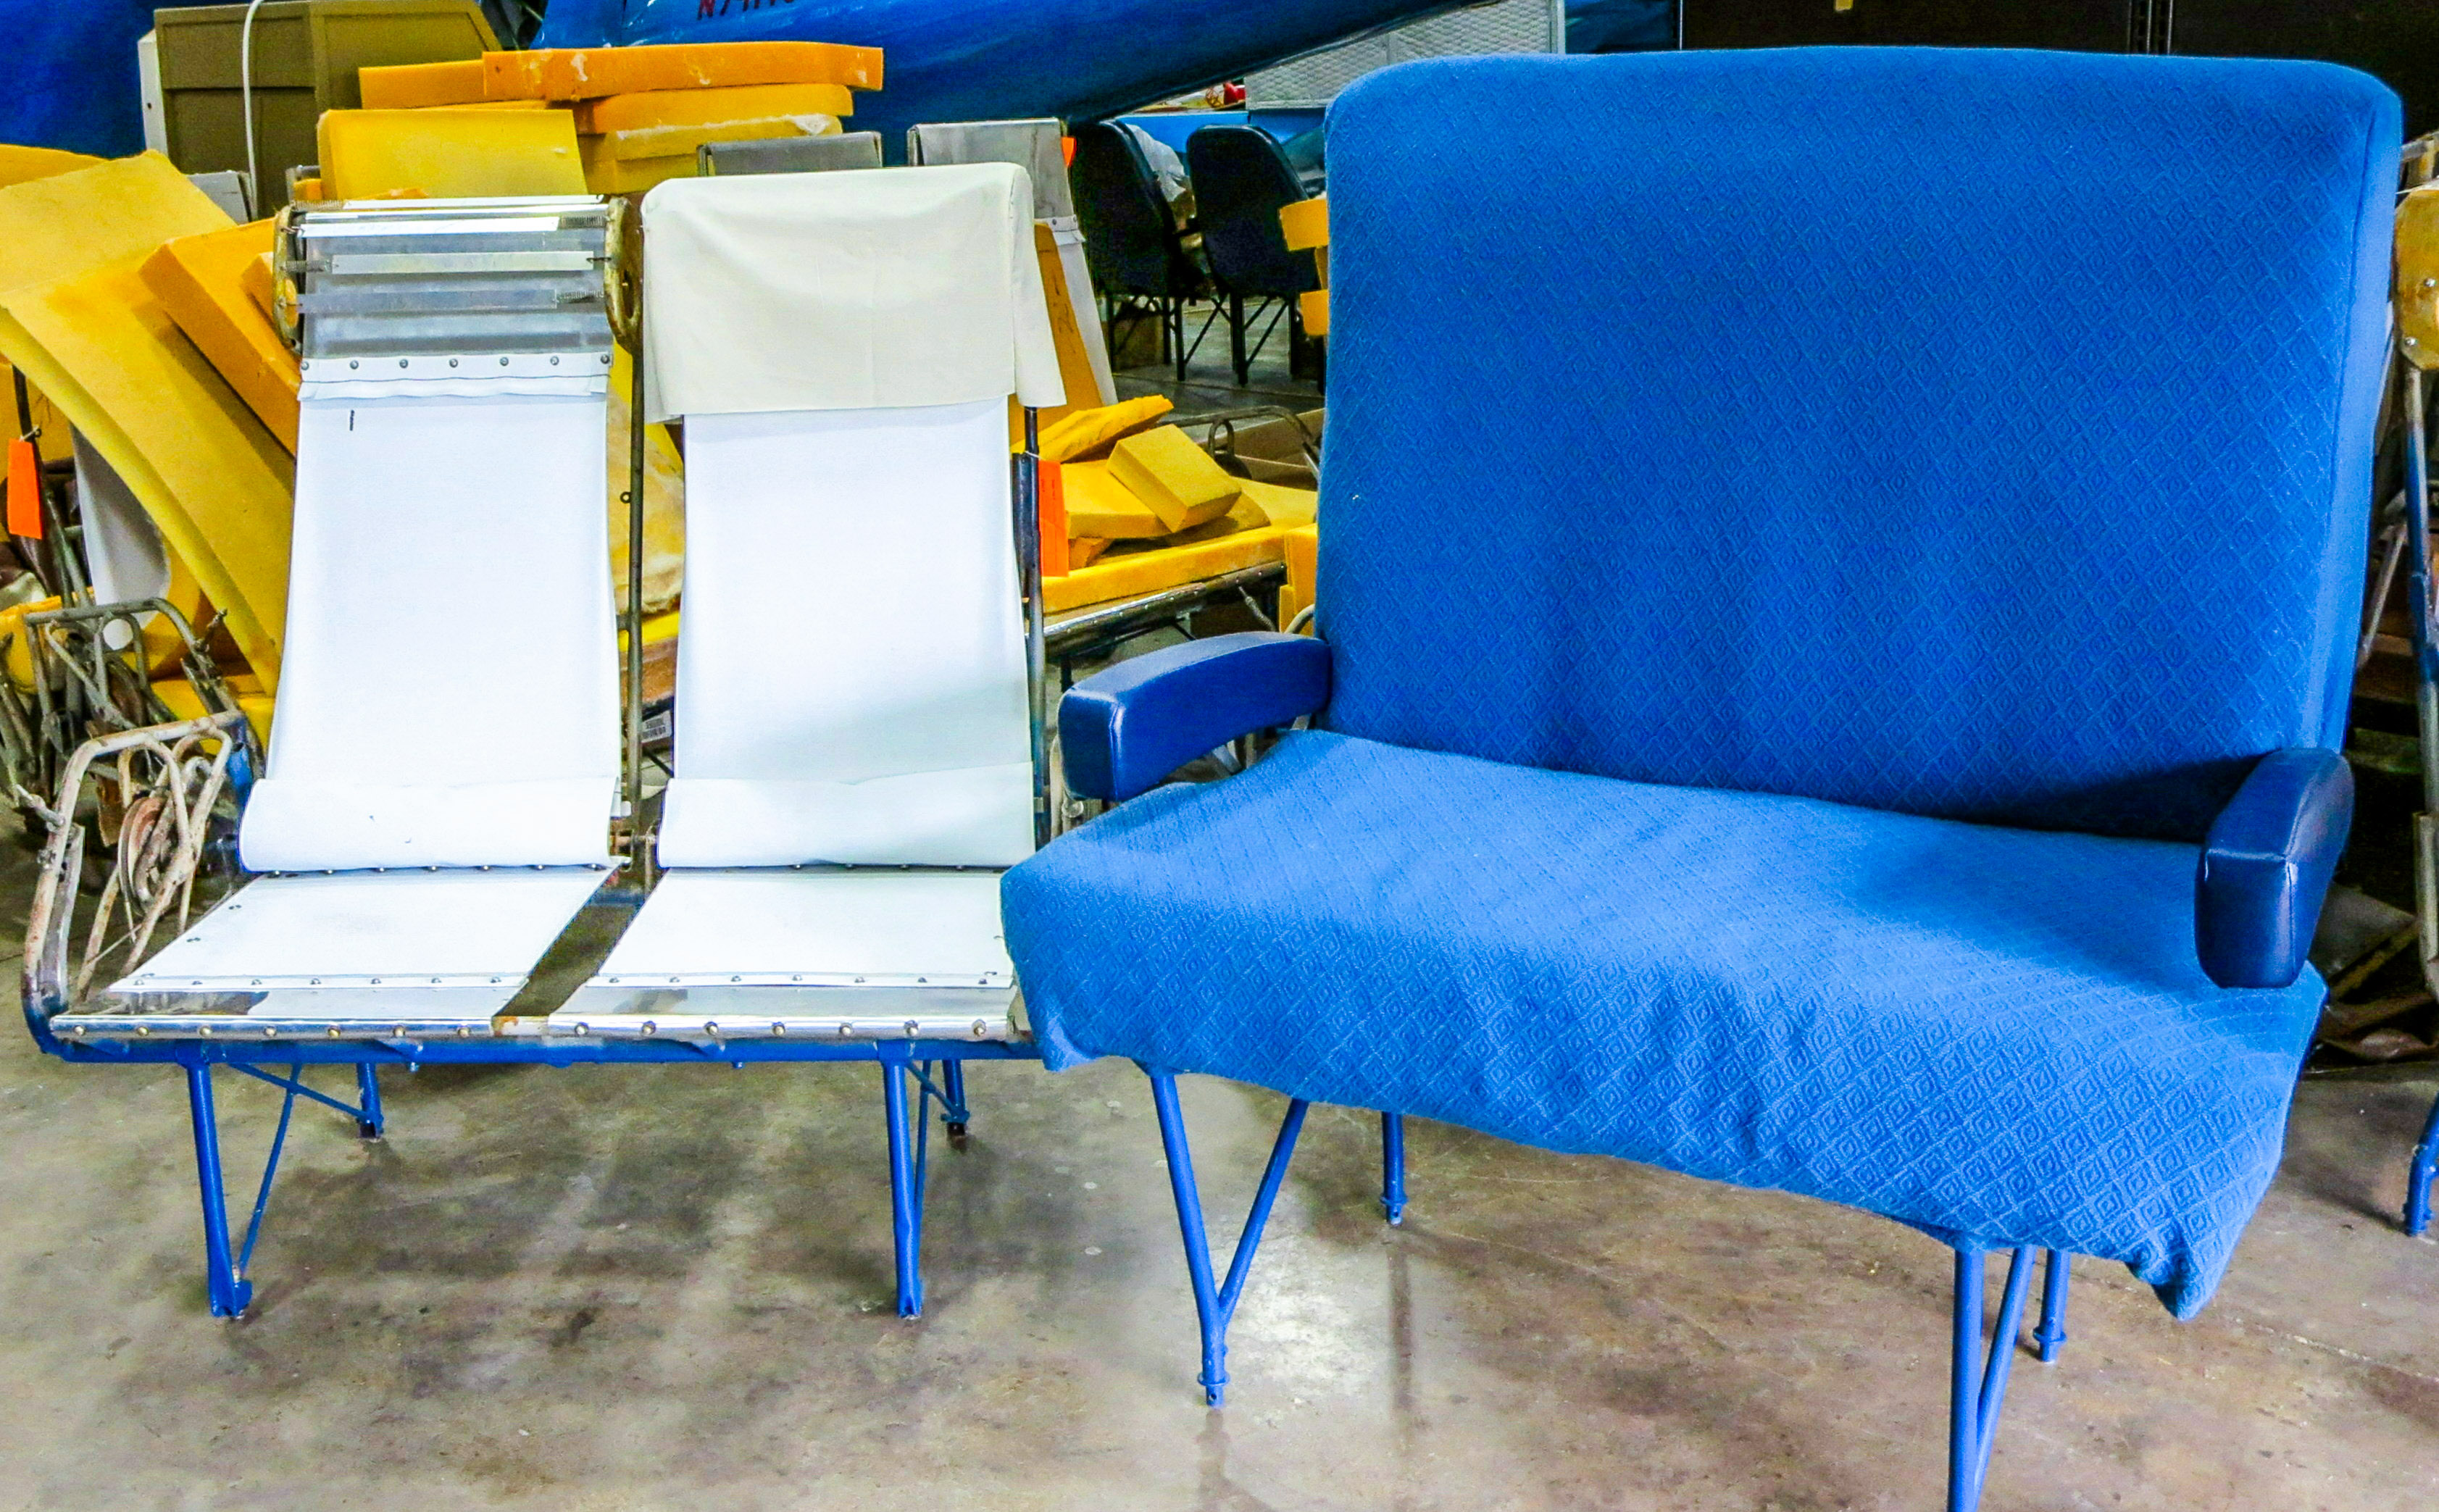 An example of the passenger seat support structure can be seen on the left, with the completed, re-upholstered Flight Attendant seat on the right. (photo via NEAM)